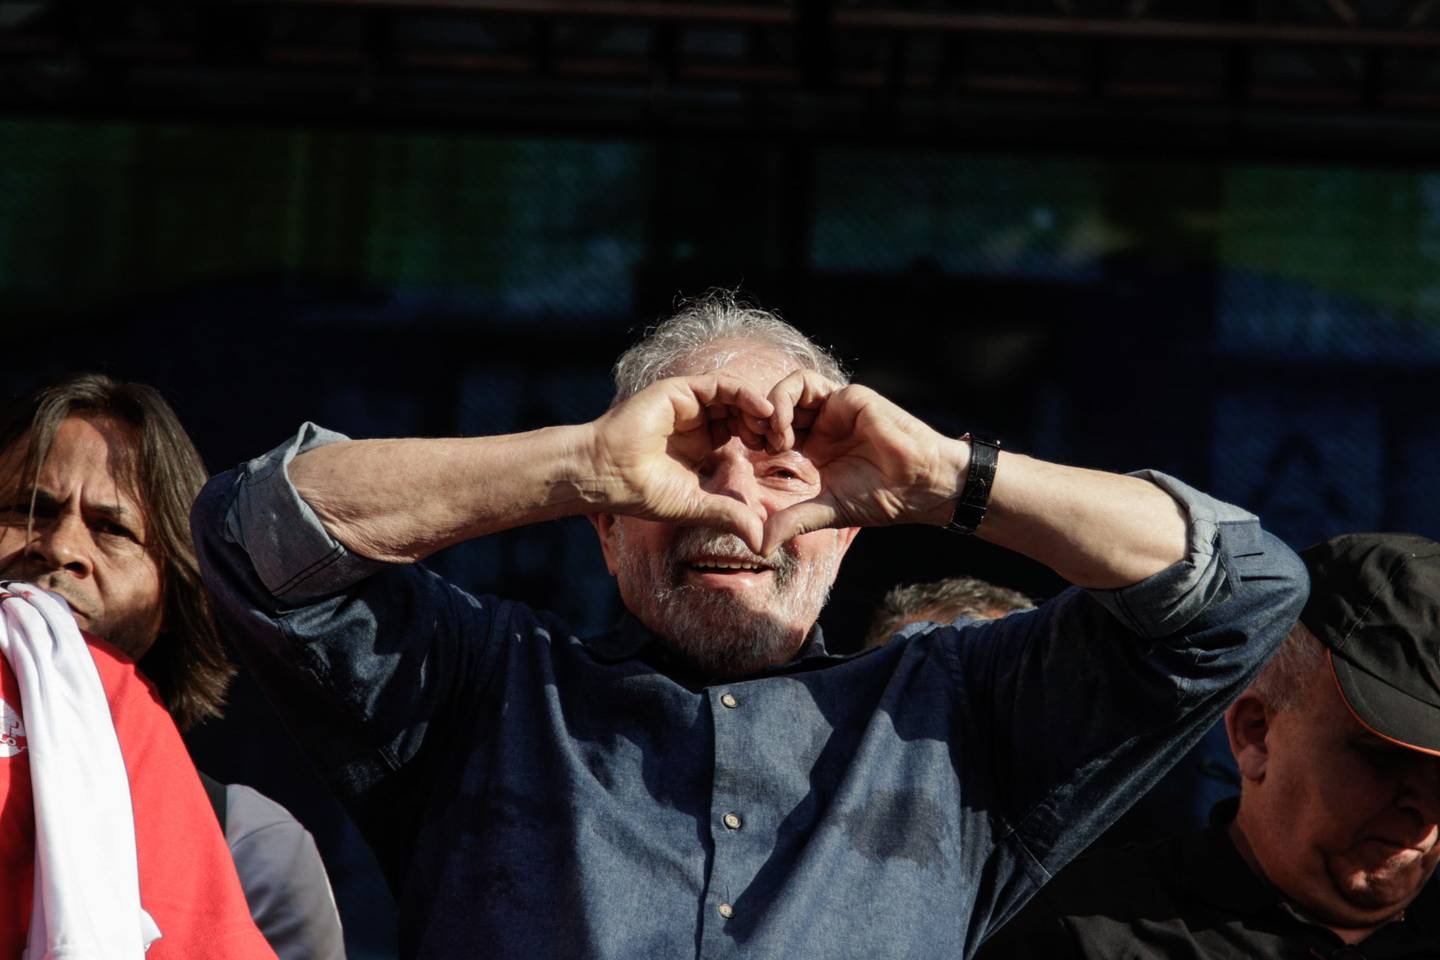 Luiz Inacio Lula da Silva, Brazil's former president, gestures after speaking during an event organized by workers' unions on International Workers' Day in Sao Paulo, Sunday, May 1, 2022.